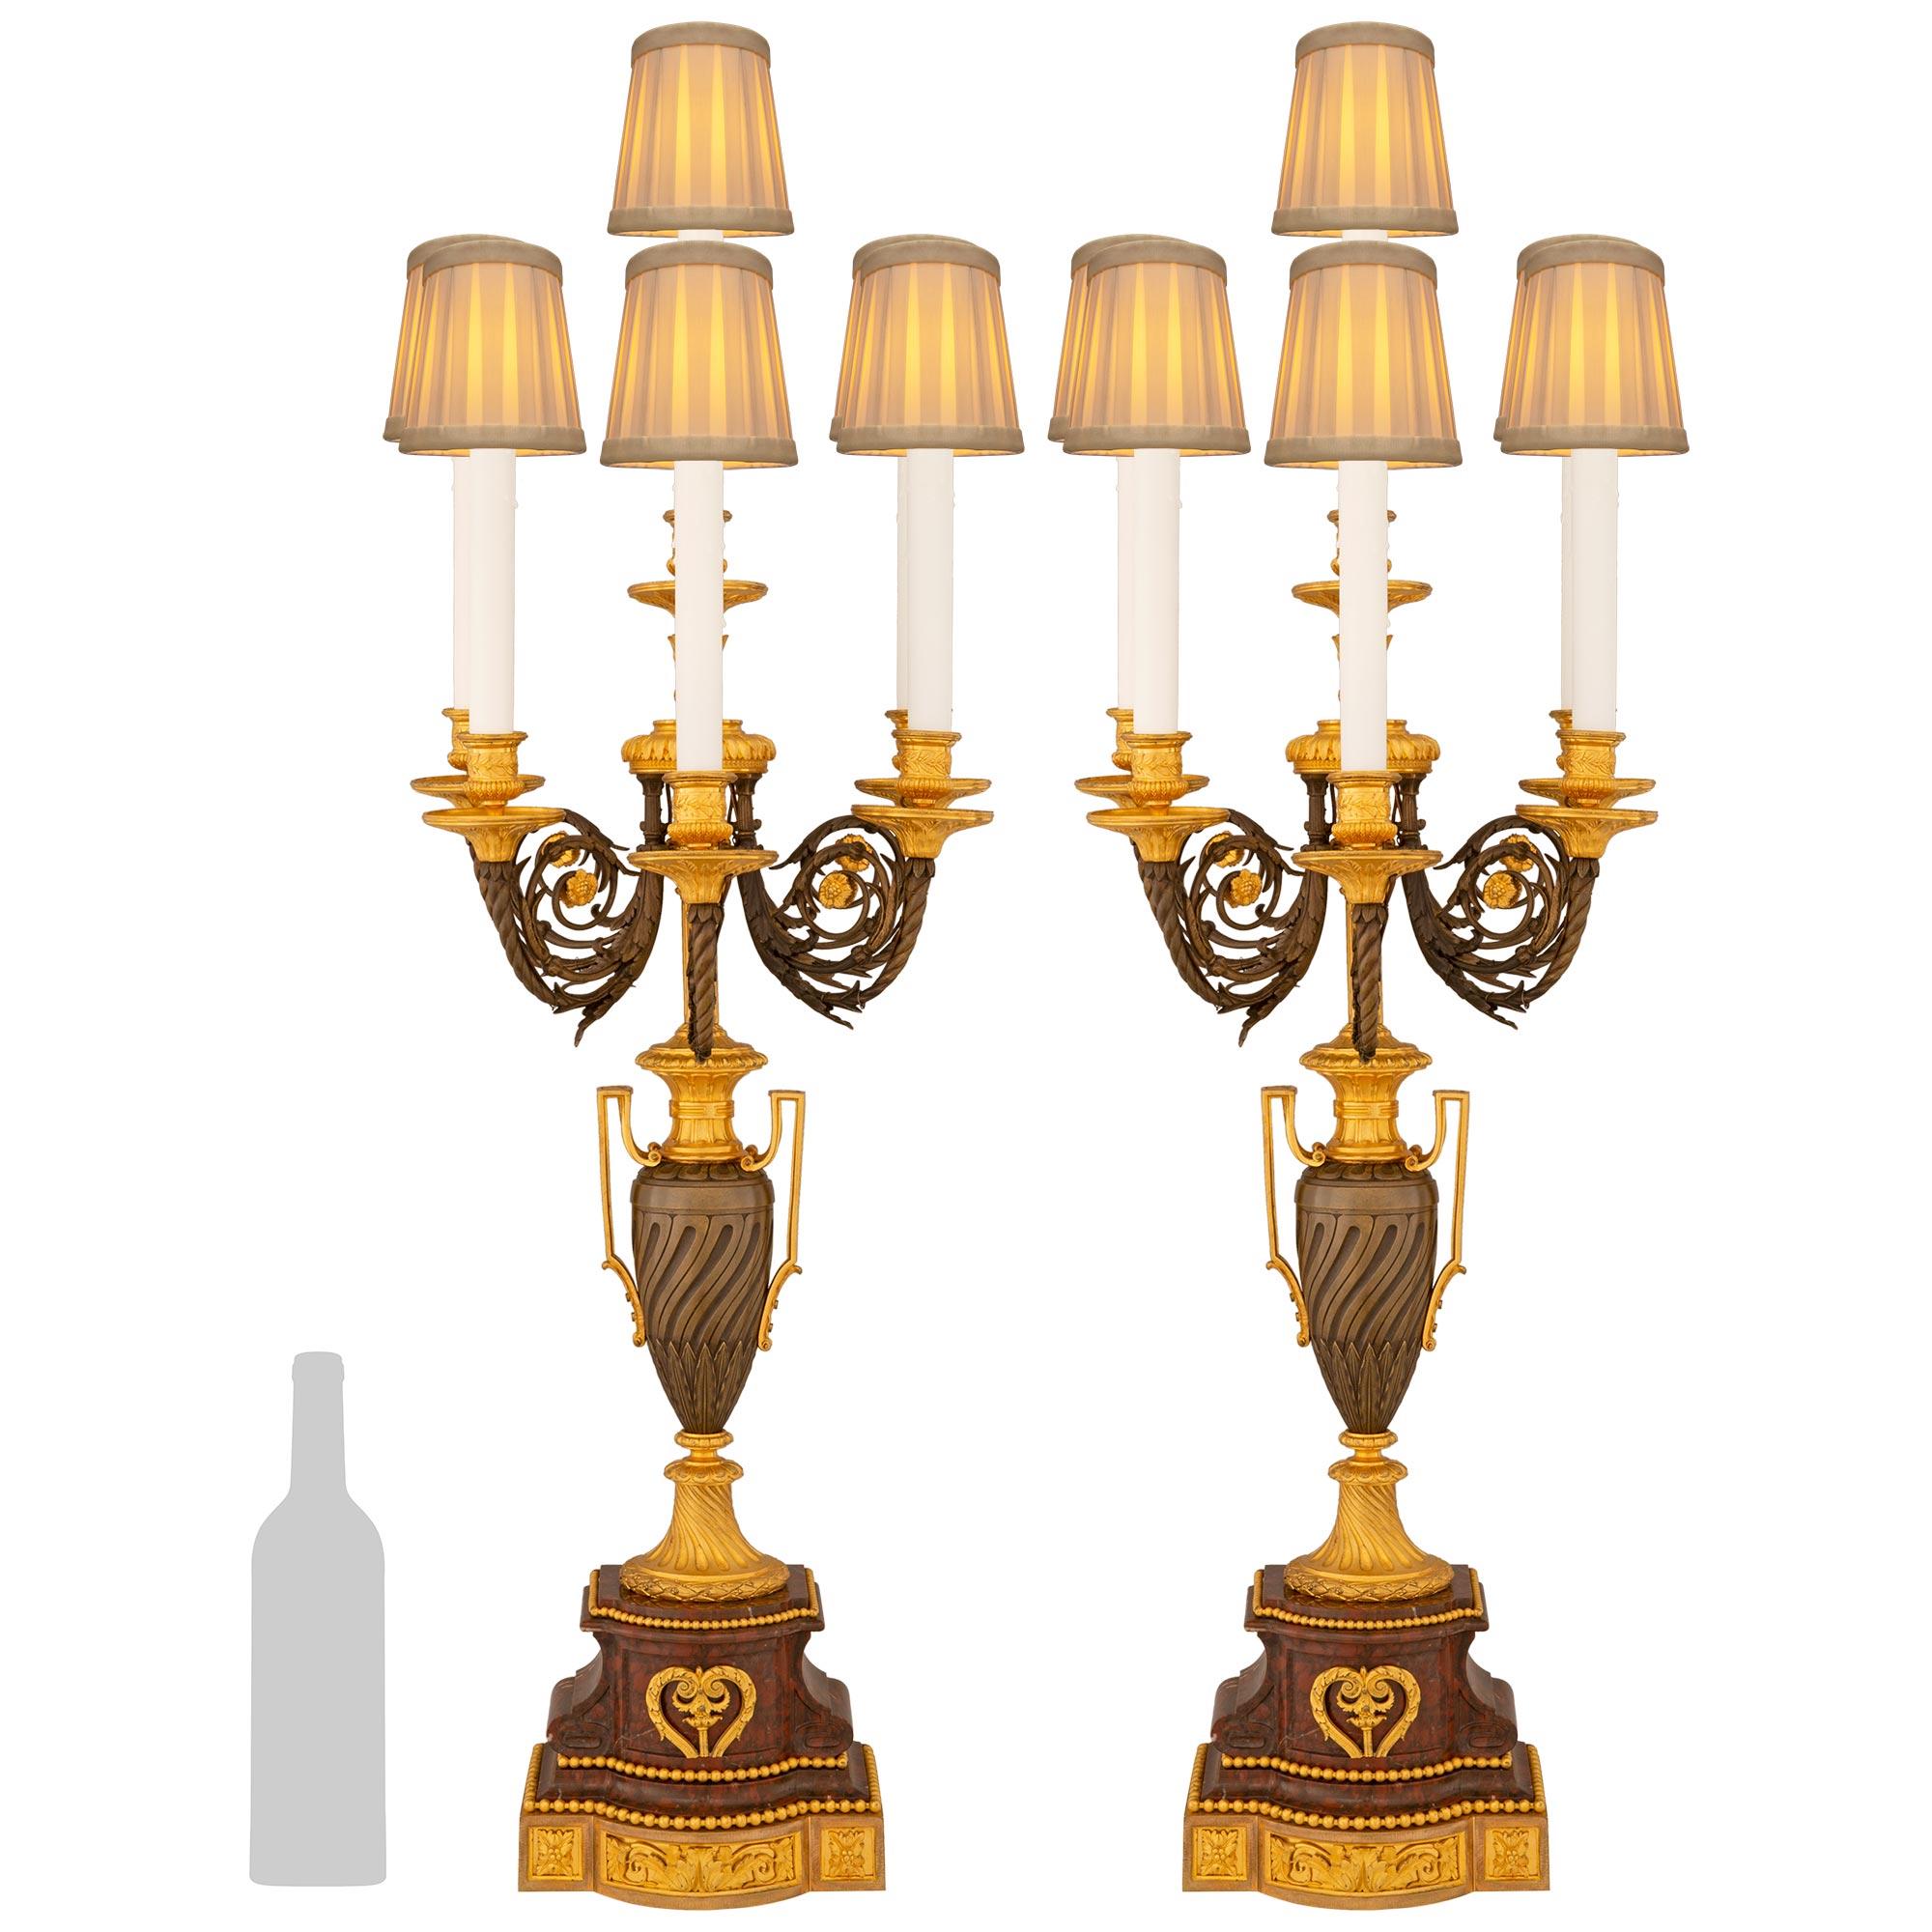 
A sensational and high quality pair of French 19th century Louis XVI st. Ormolu, patinated Bronze and Rouge Griotte marble candelabra lamps, signed H. Picard. Each stunning electrified candelabra is raised on an Ormolu plinth with a protruding